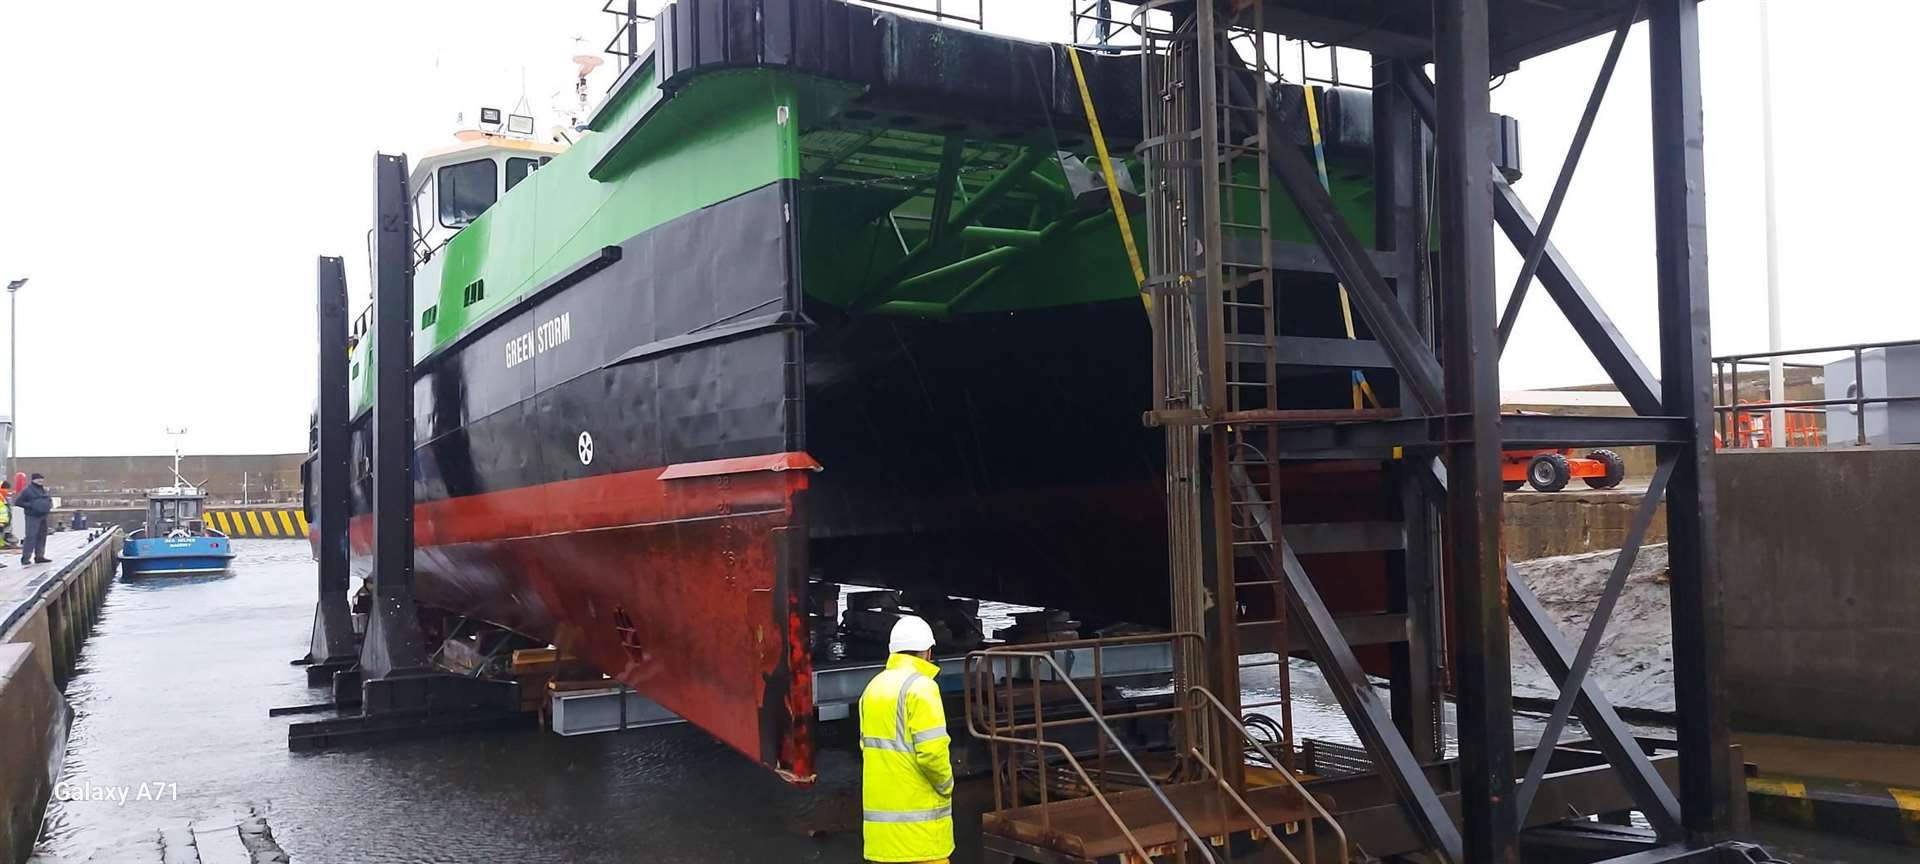 The commercial project has been a collaborative effort between Aberdeenshire Council and Macduff Shipyards.